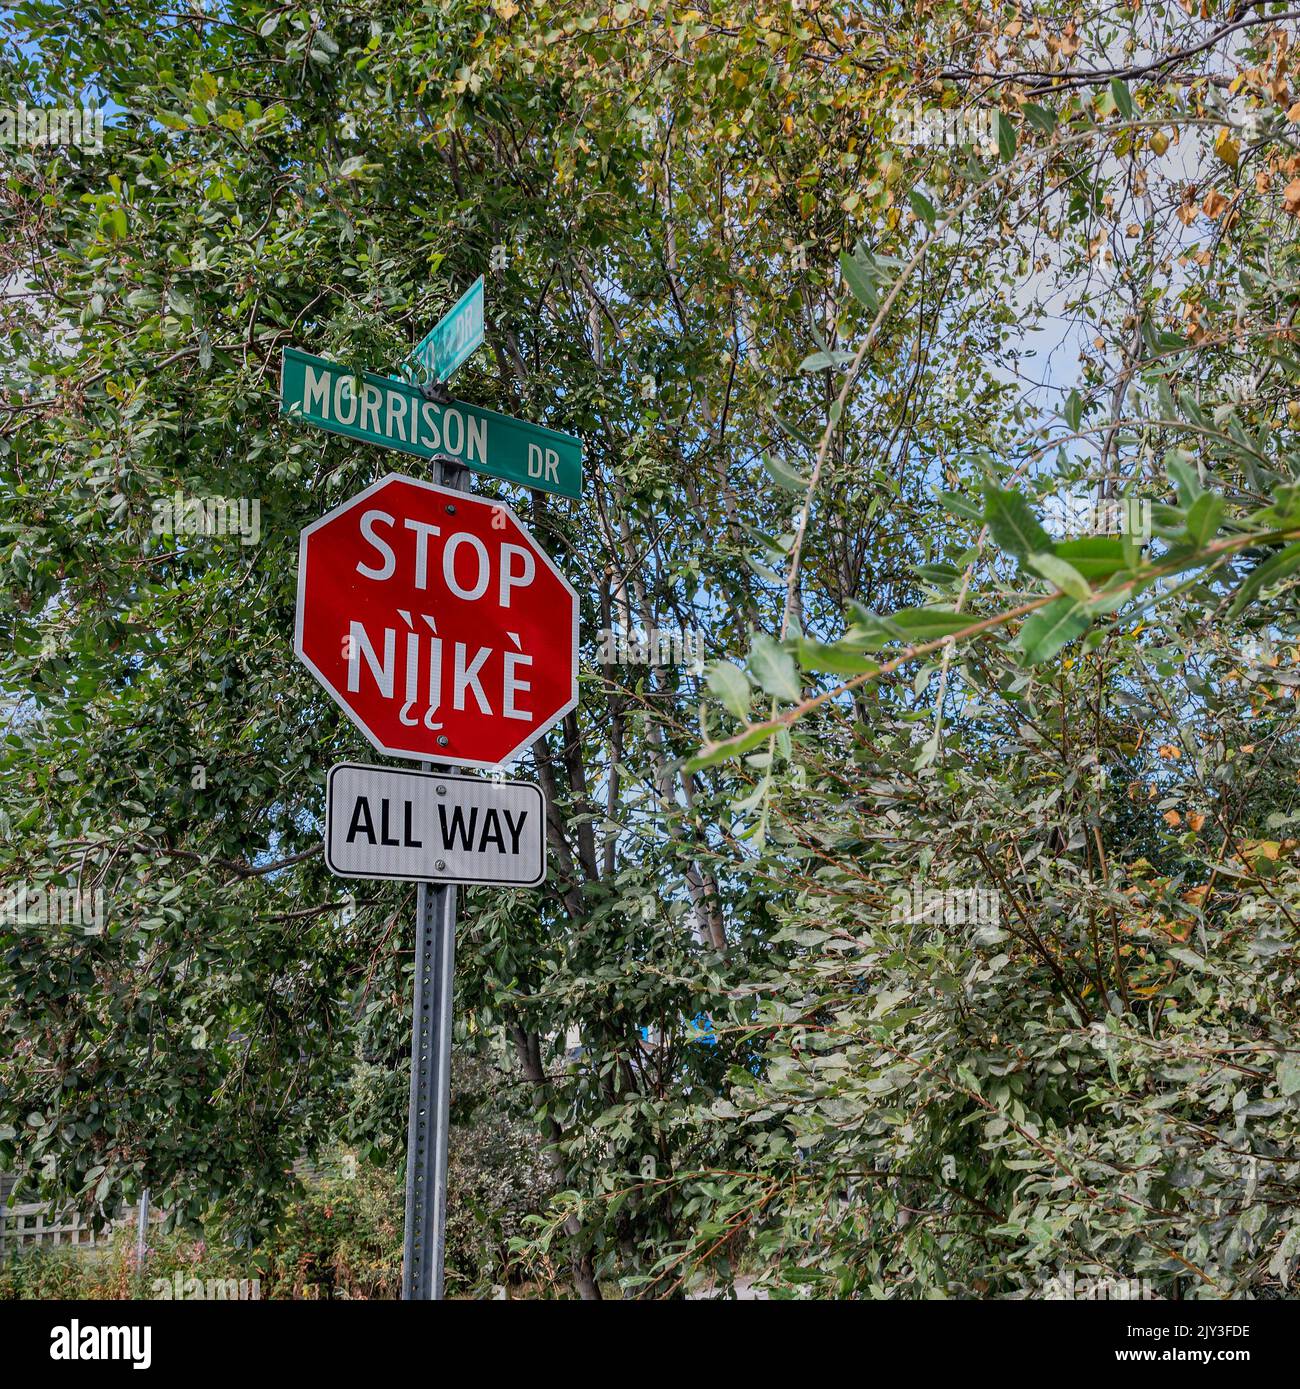 Stop sign in Yellowknife with English and Wiliideh, the dialect spoken by the Dene in the area Stock Photo